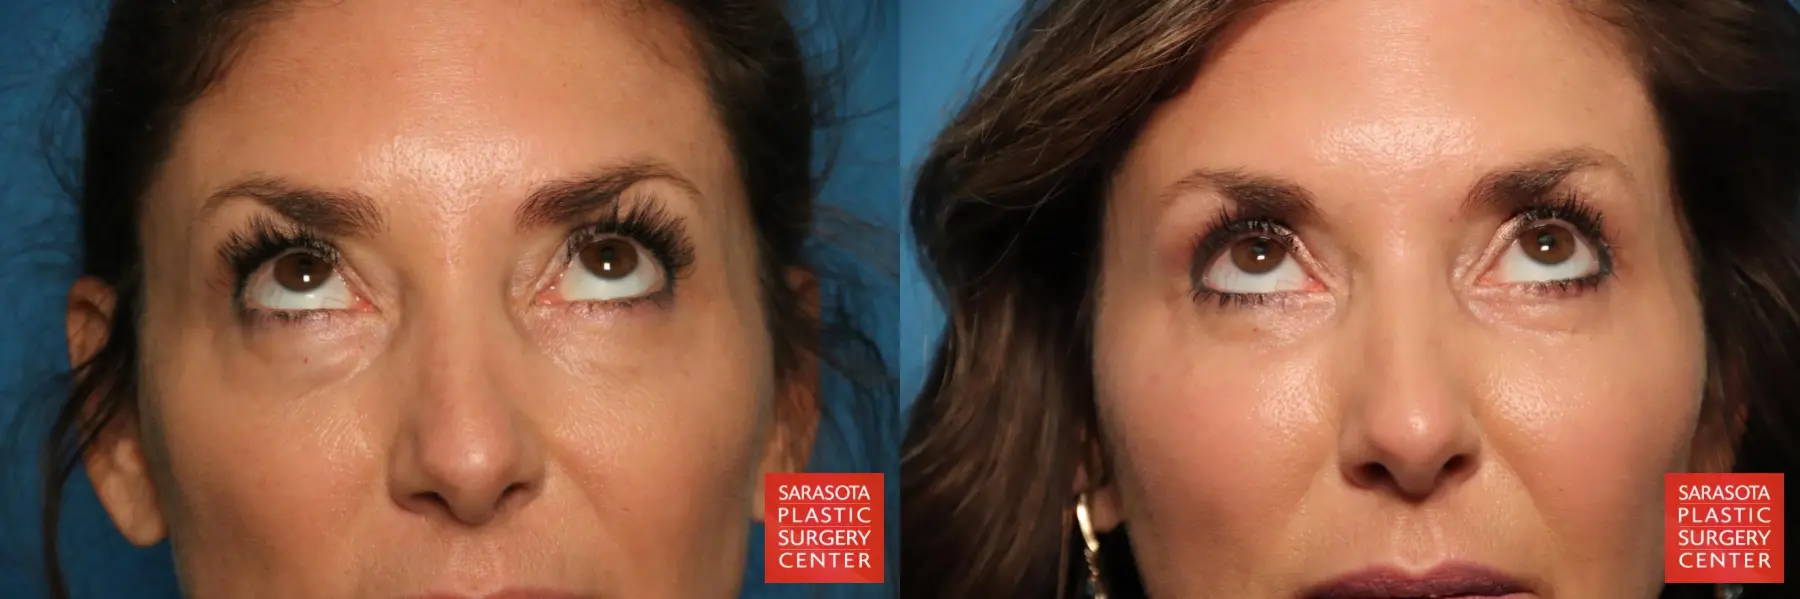 Eyelid Surgery: Patient 6 - Before and After 2